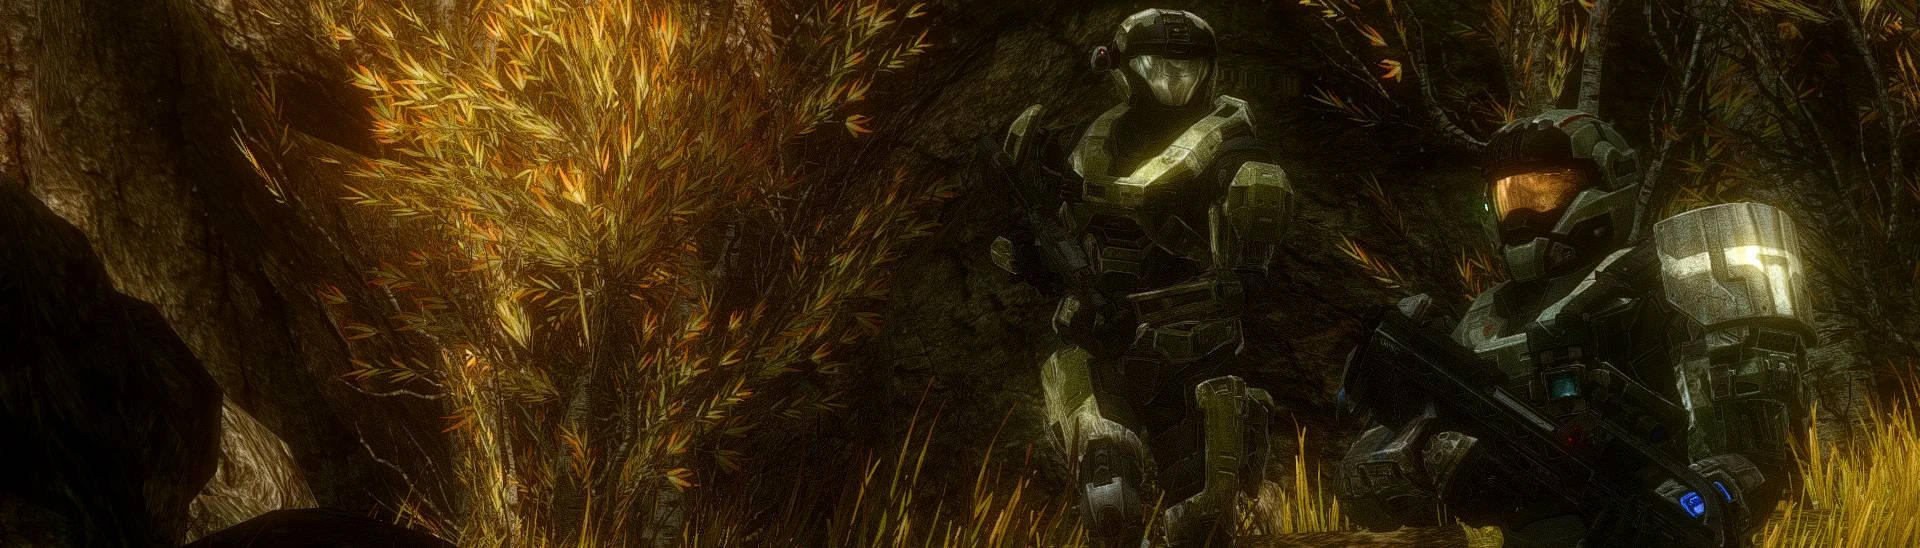 Microsoft Can't Fix Its Halo: Master Chief Collection Fail